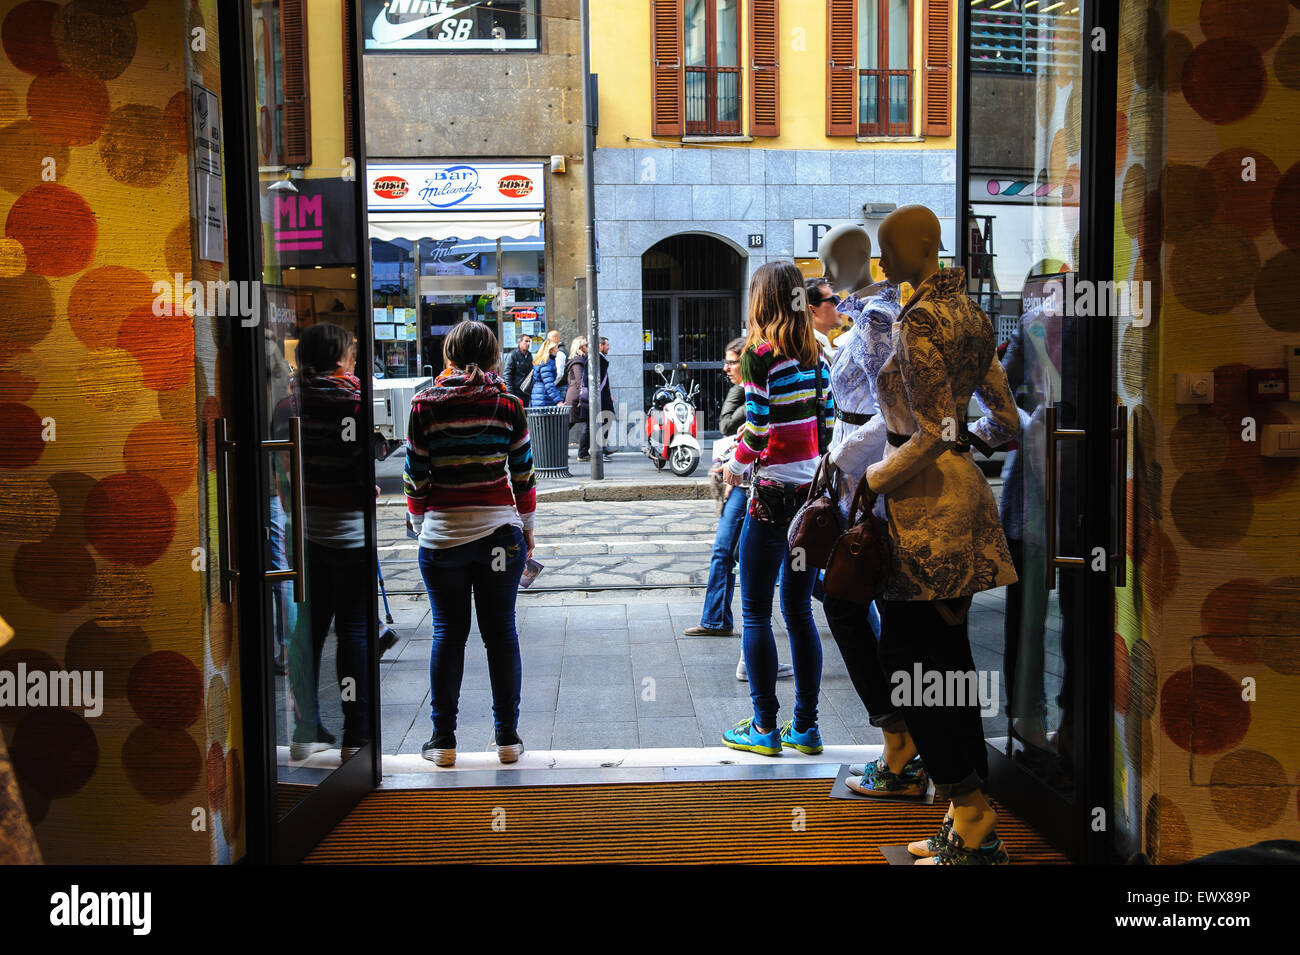 MILAN, ITALY - MARCH 18, 2015: On the streets of the city. Inside of Desigual store. Stock Photo